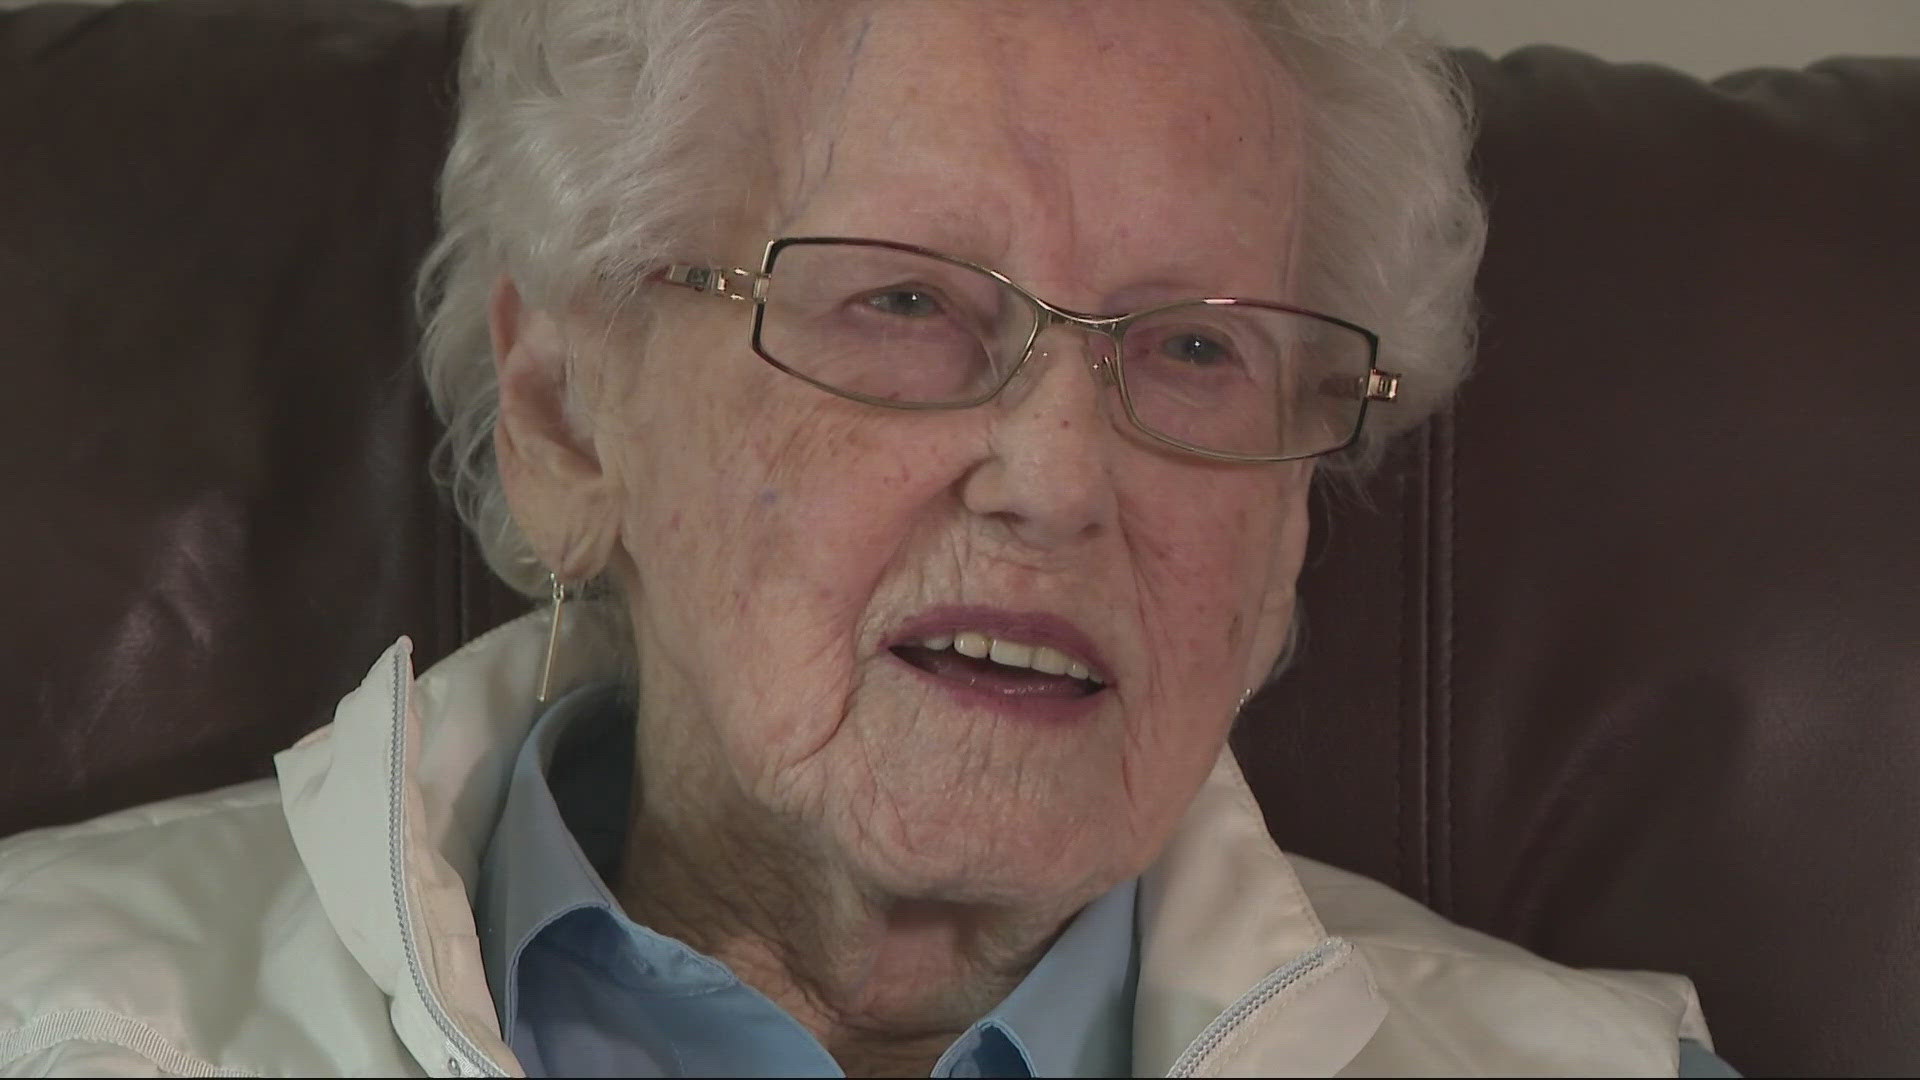 Irene Jones may be 105 years old, but you wouldn’t guess it. She’s got a full schedule every day that includes bingo, skipbowl, excursions and more.